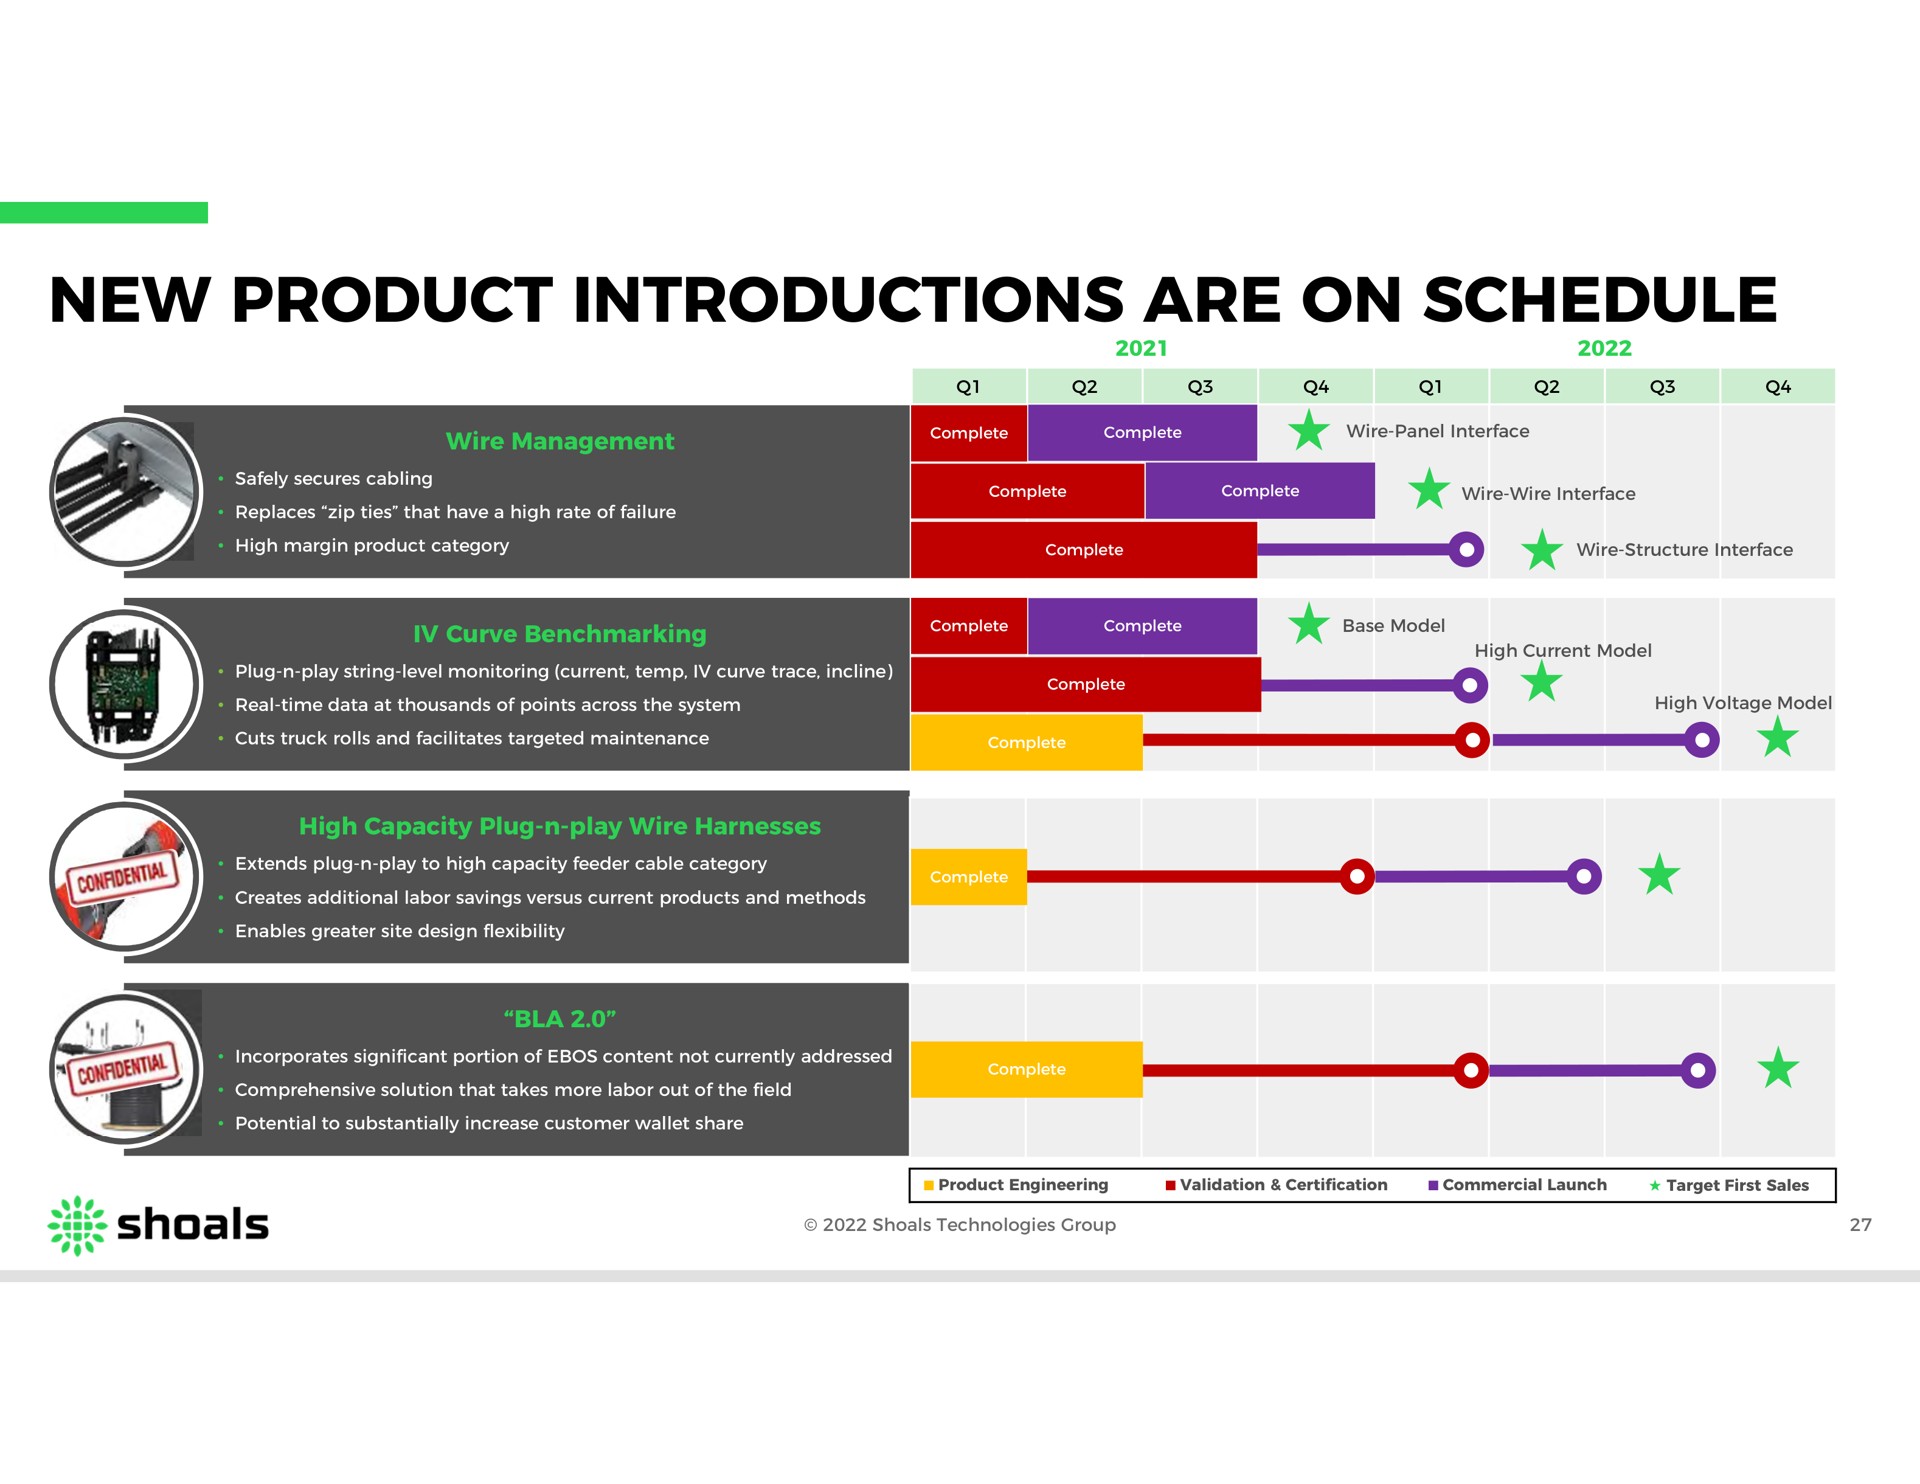 new product introductions are on schedule | Shoals